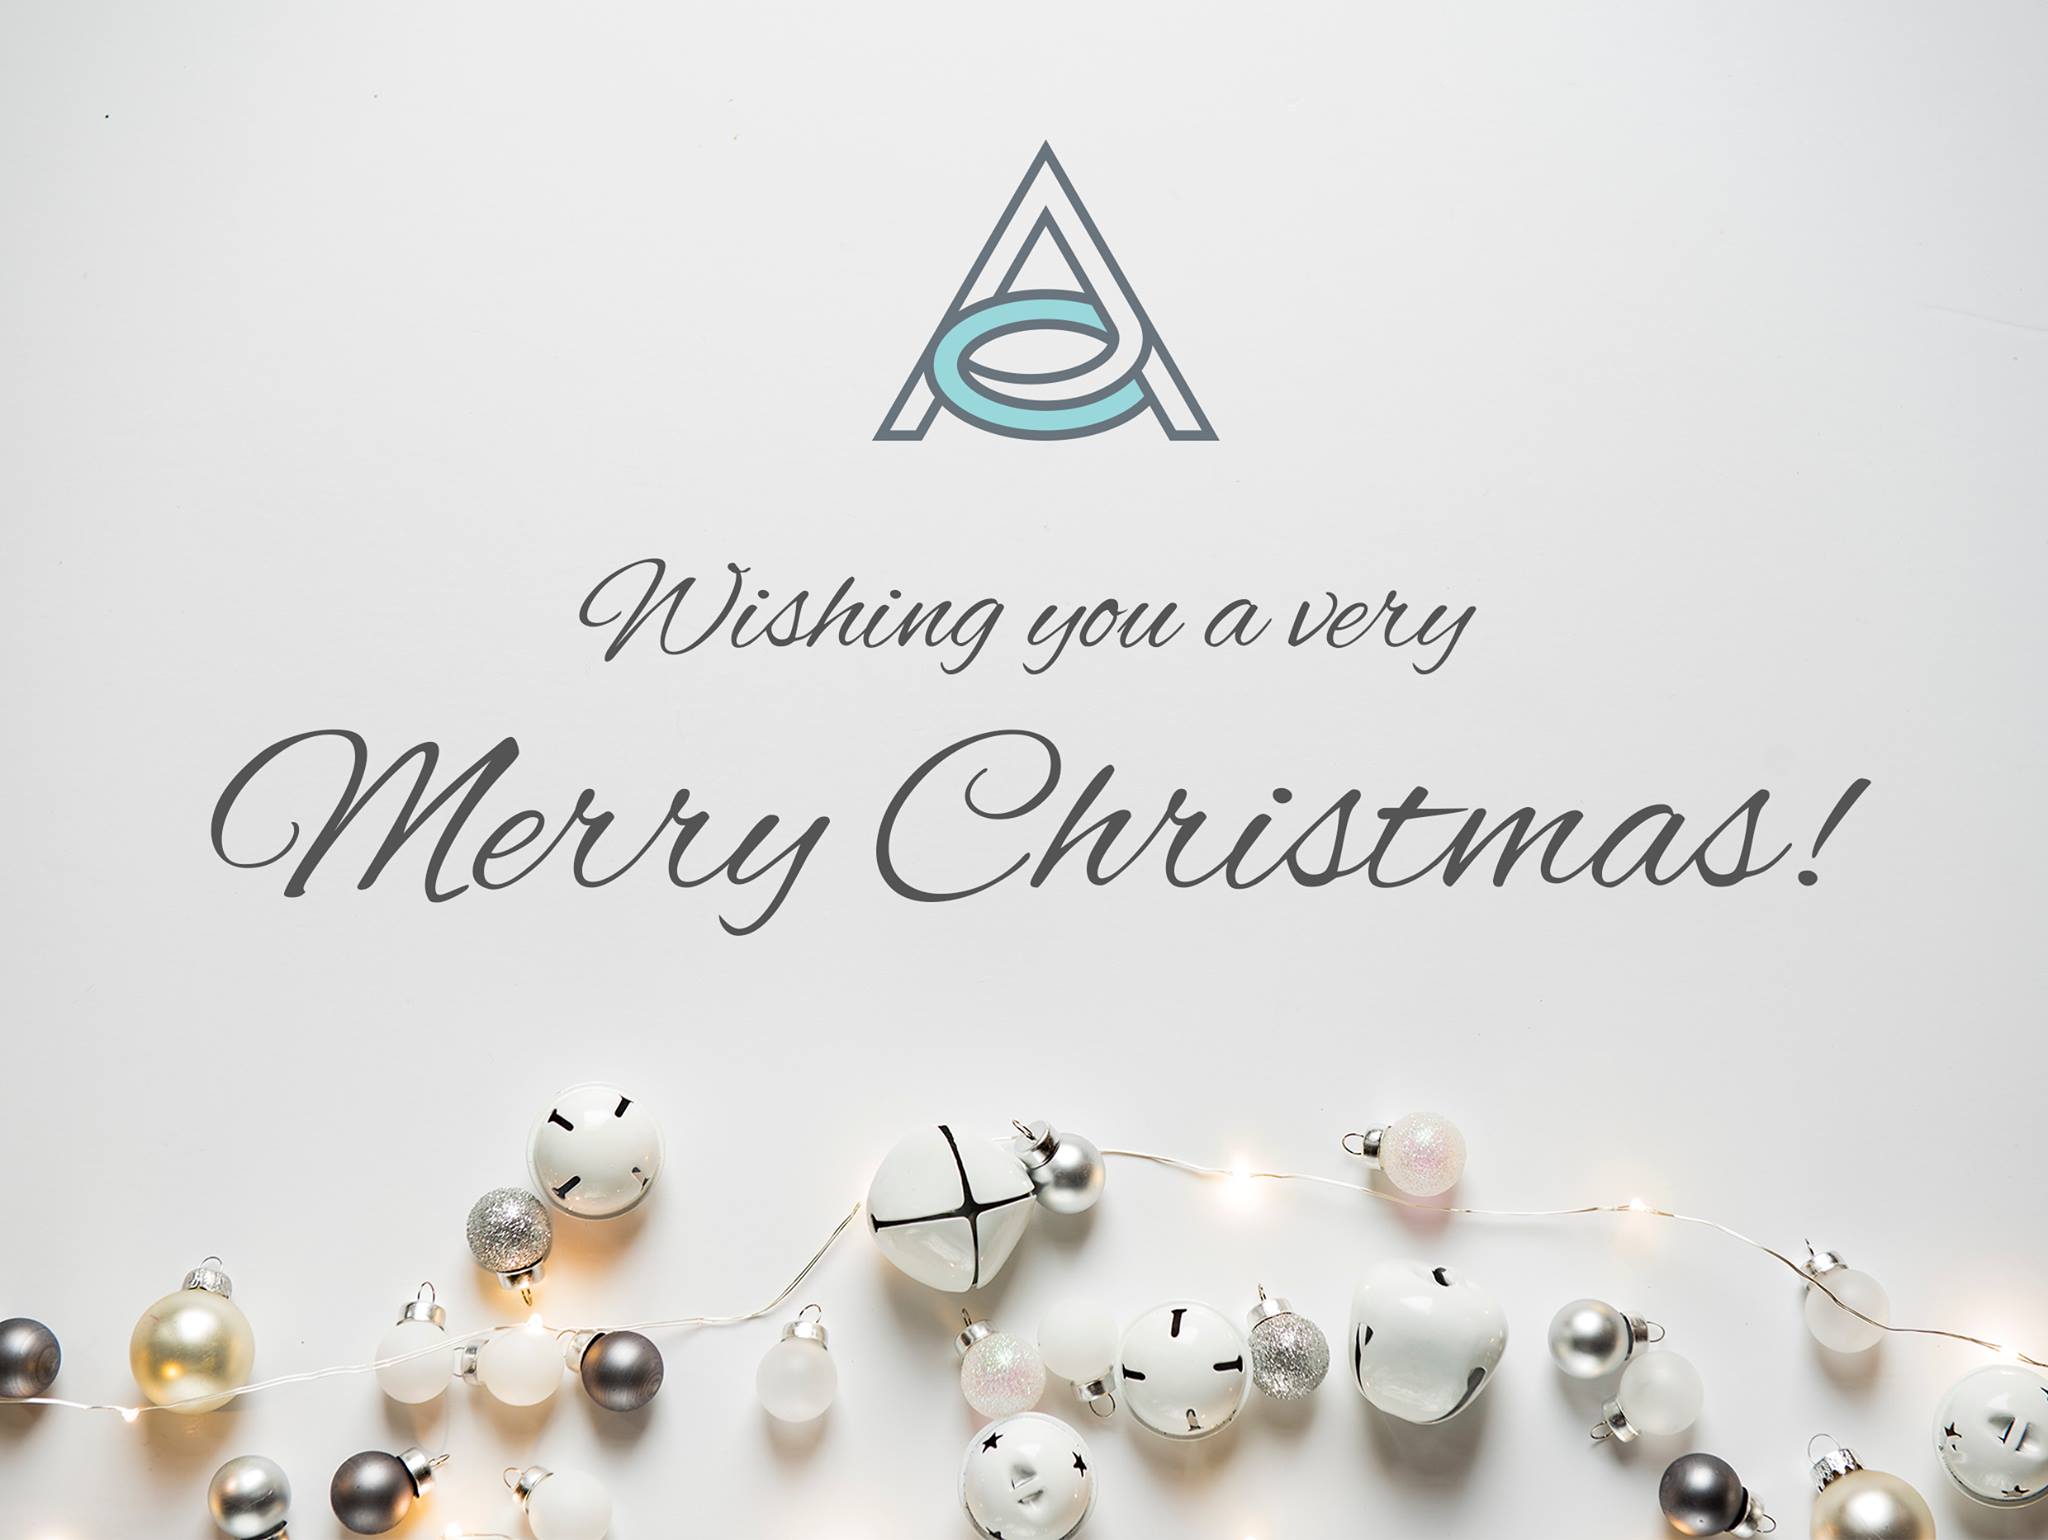 From our family to yours, Merry Christmas!